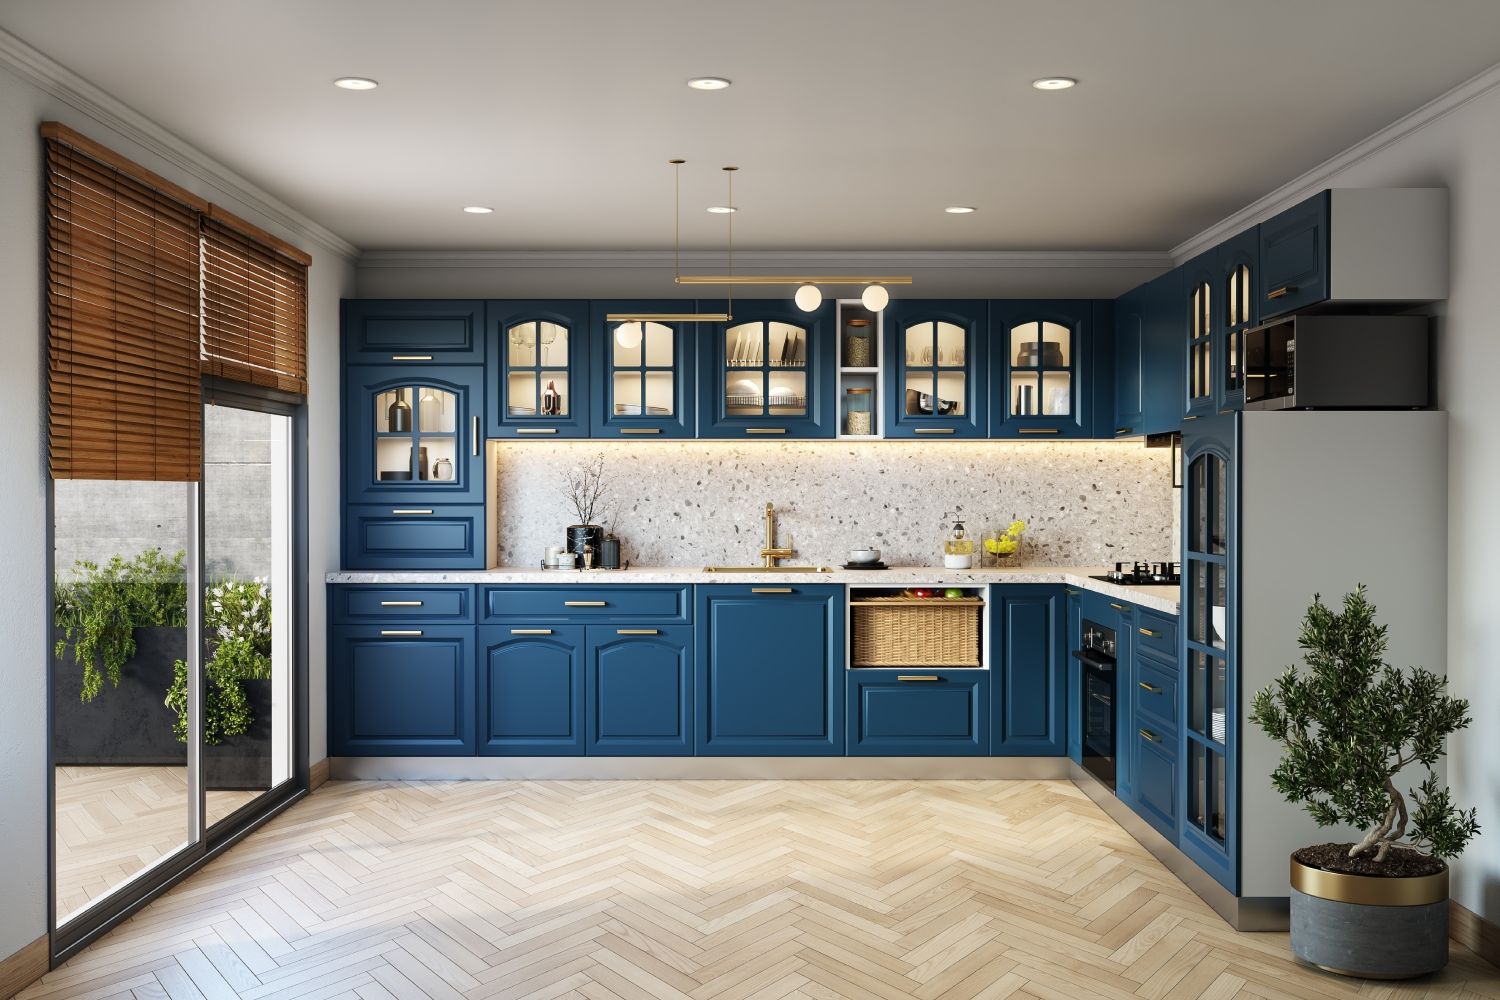 Classic Modular L Shape Indian Kitchen Design With Blue Cabinets